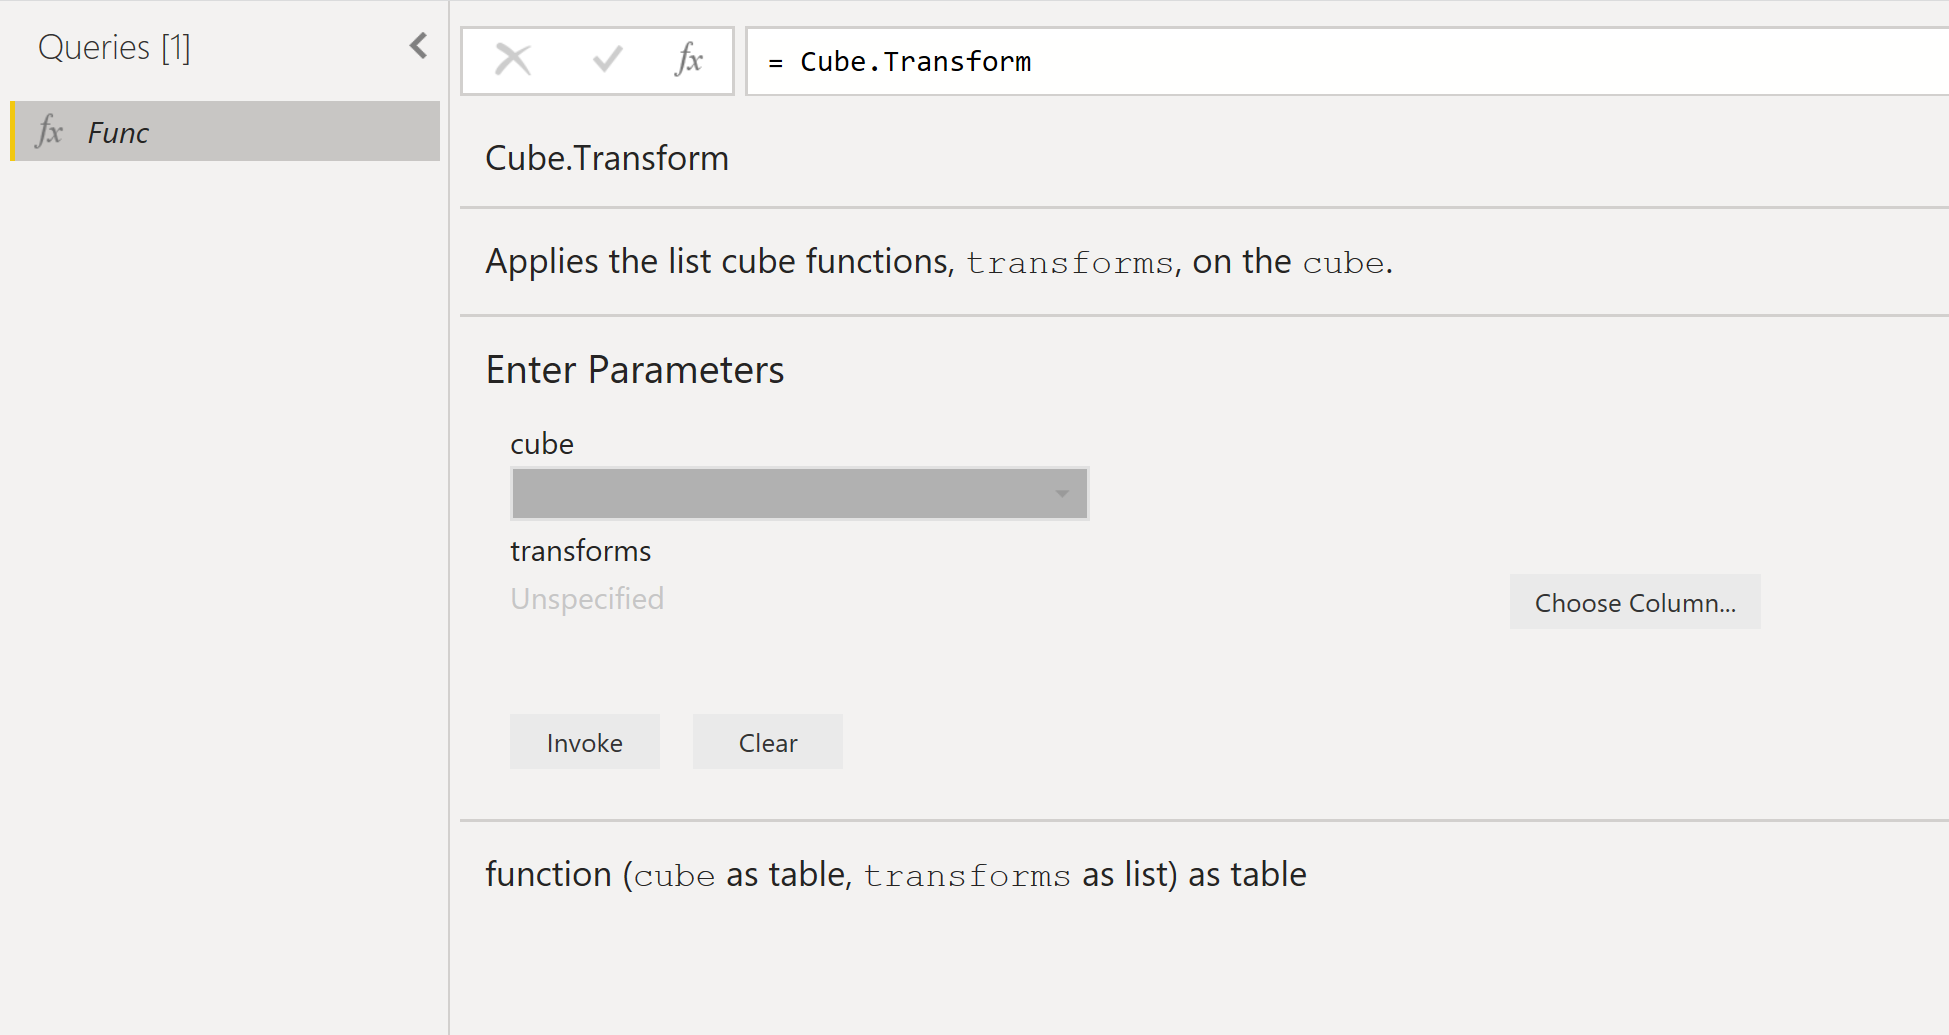 Image of the create function dialog box showing information about the Cube.Transform function.